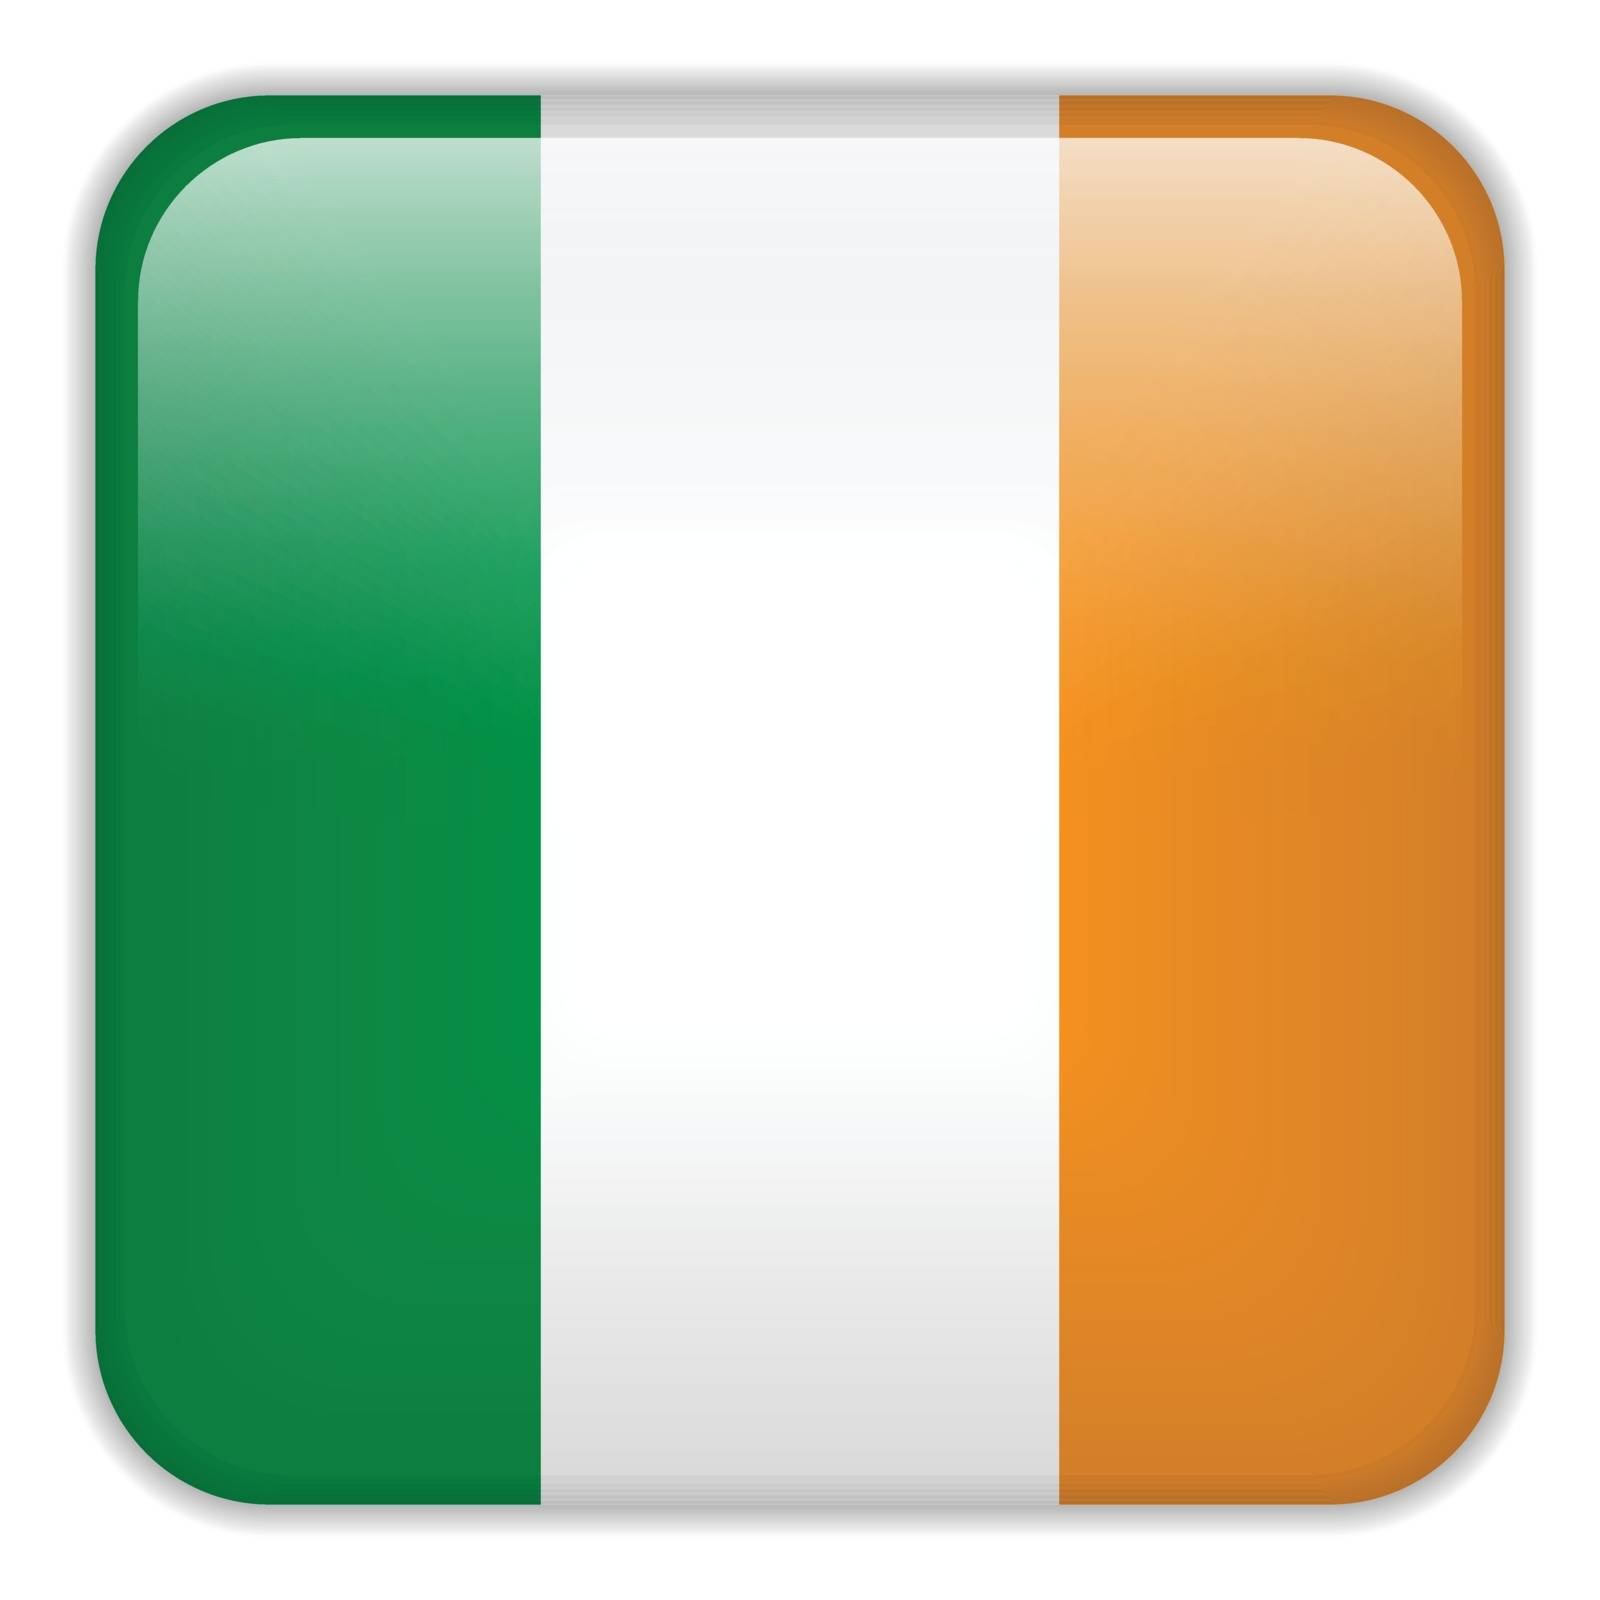 Ireland Flag Smartphone Application Square Buttons by gubh83